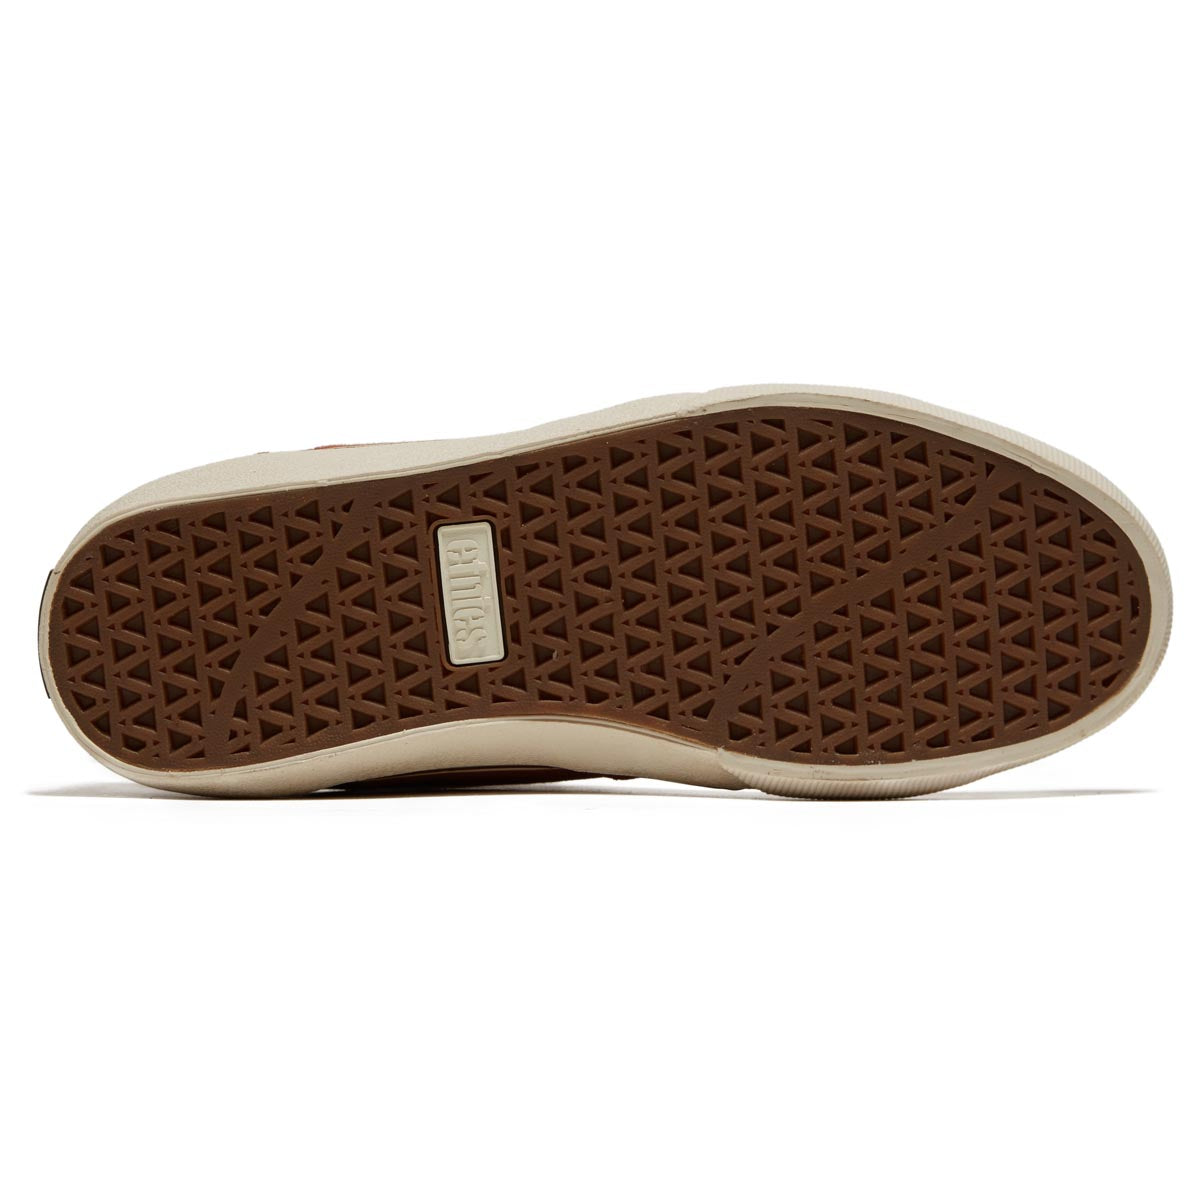 Etnies Barge Ls Shoes - Brown/Gold/Yellow image 4